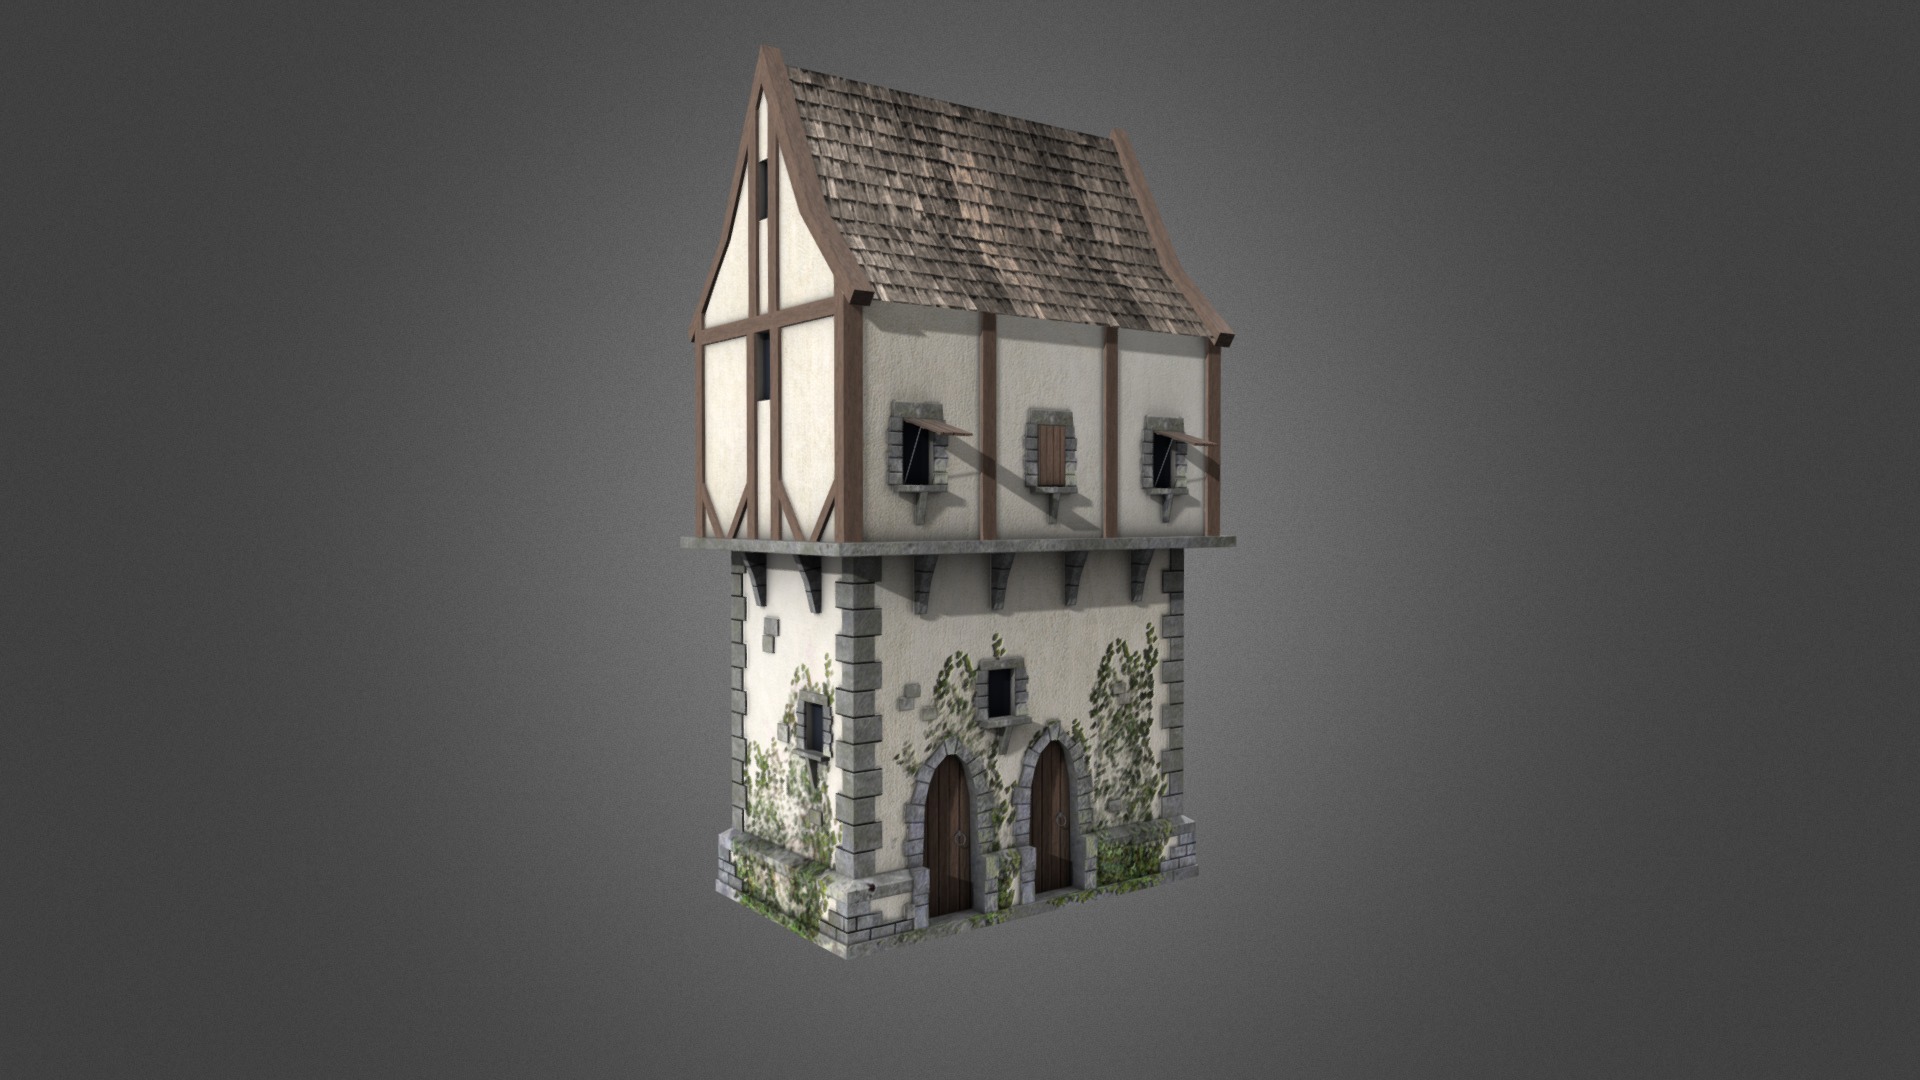 Low poly game-ready 3d model of a Medieval Townhouse

Download: http://gamedev.cgduck.pro - Medieval Townhouse - 3D model by CG Duck (@cg_duck) 3d model